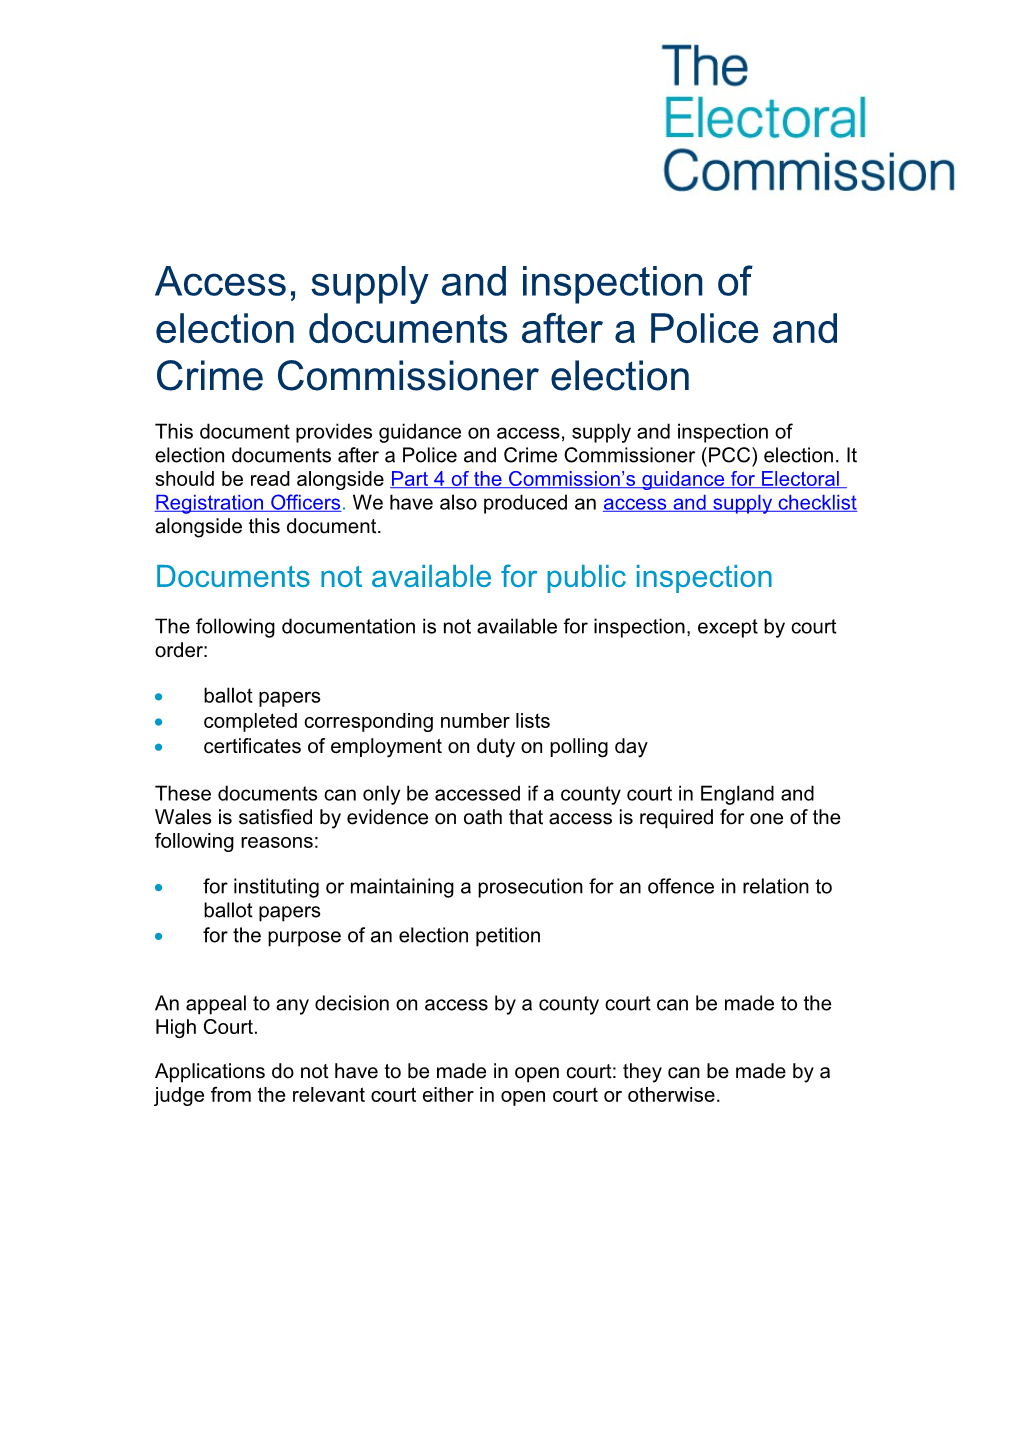 PCC Guidance on the Retention and Inspection of Election Documents